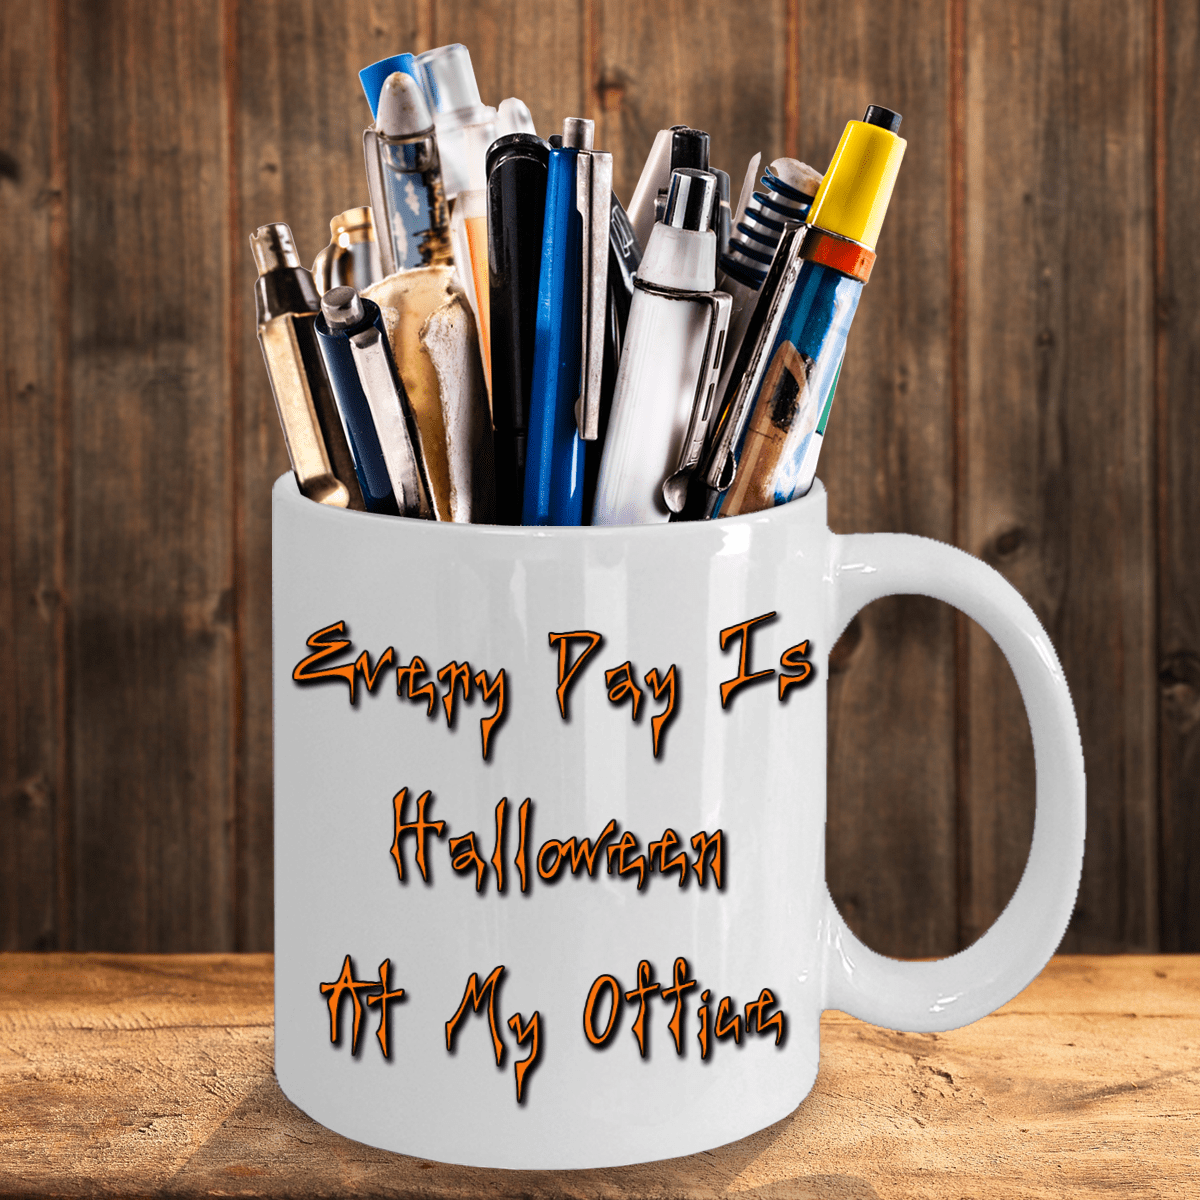 Every Day Is Halloween At My Office Mug - Omtheo Gifts